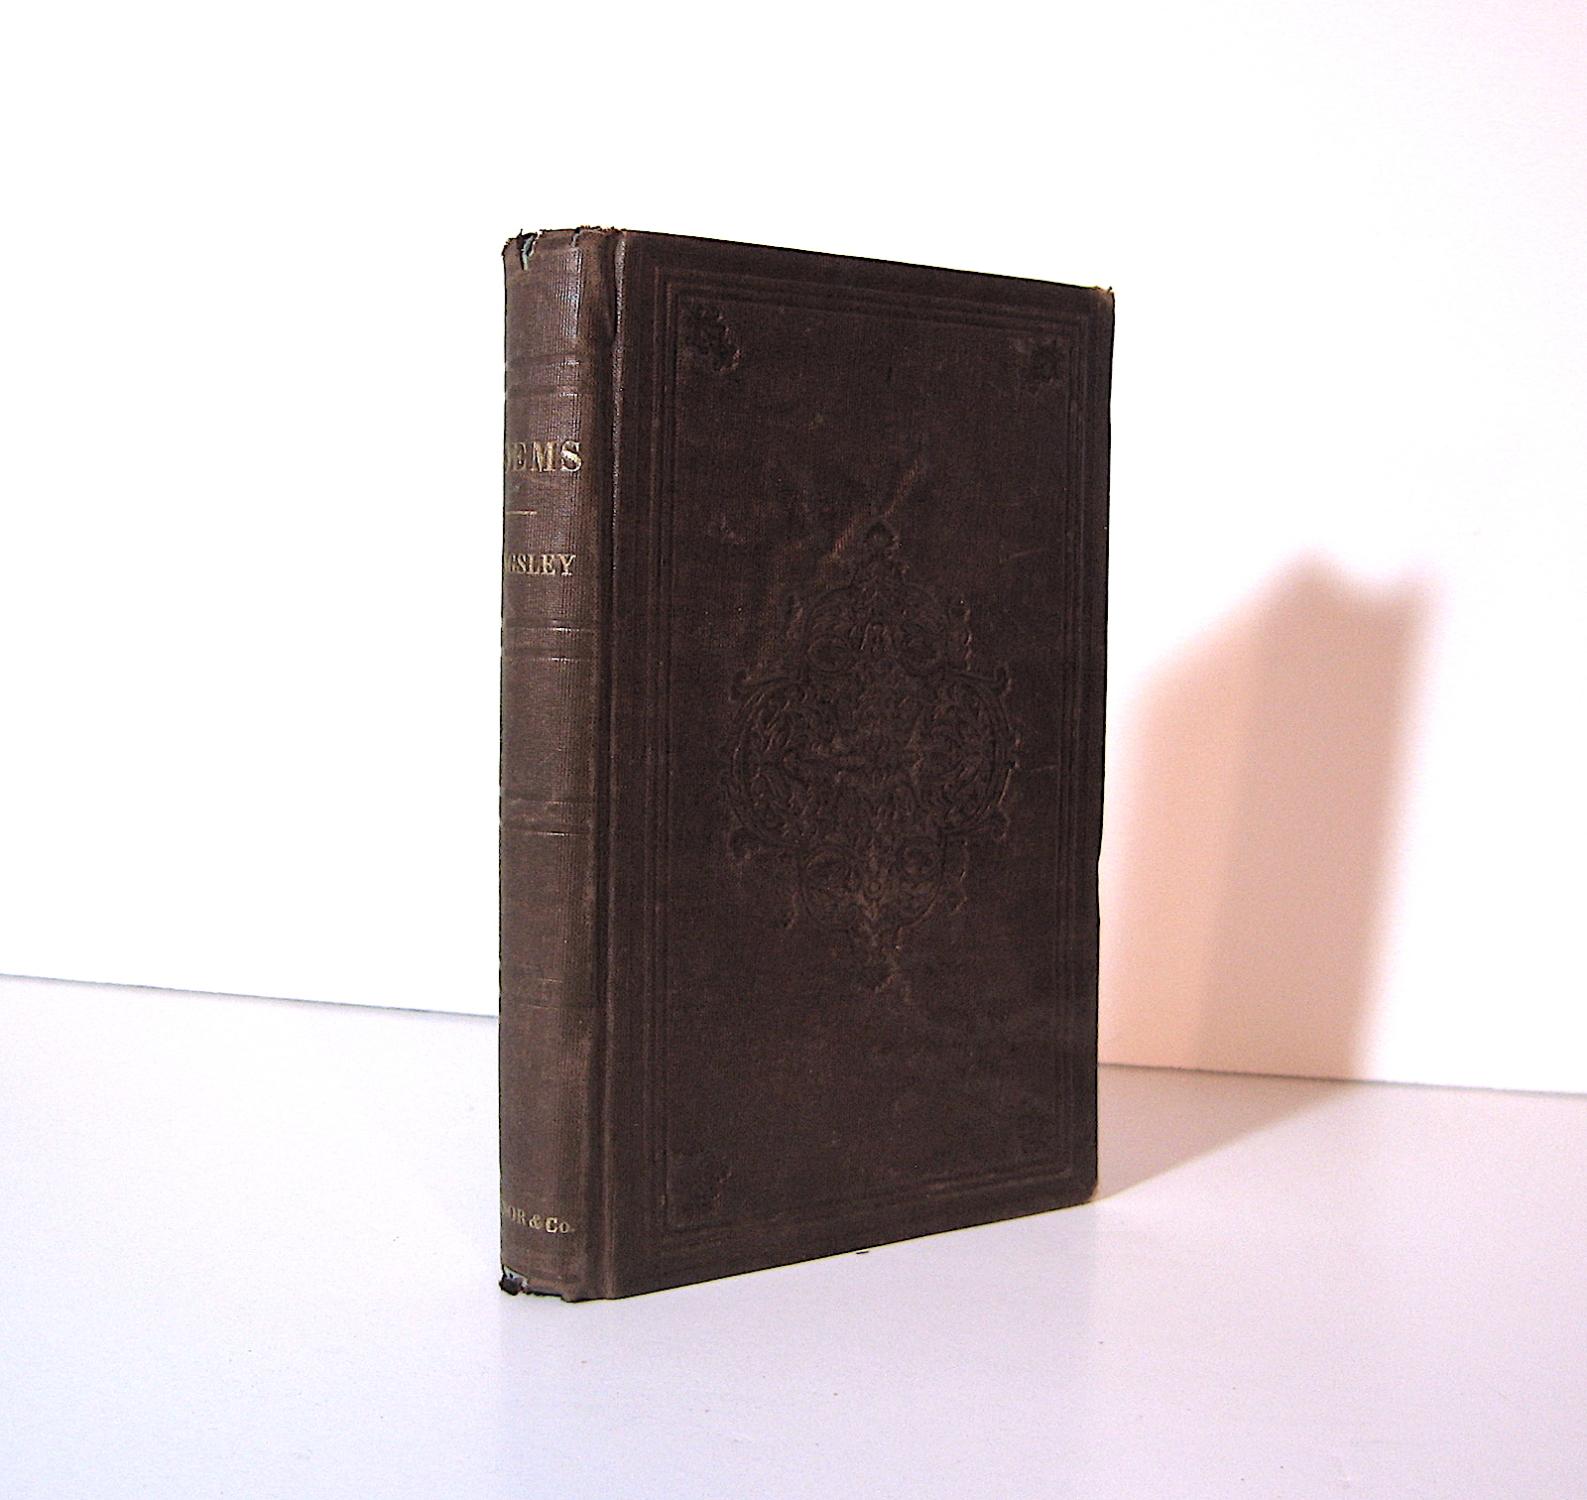 Charles Kingsley Poems 1856 First, American Leather Kingsley